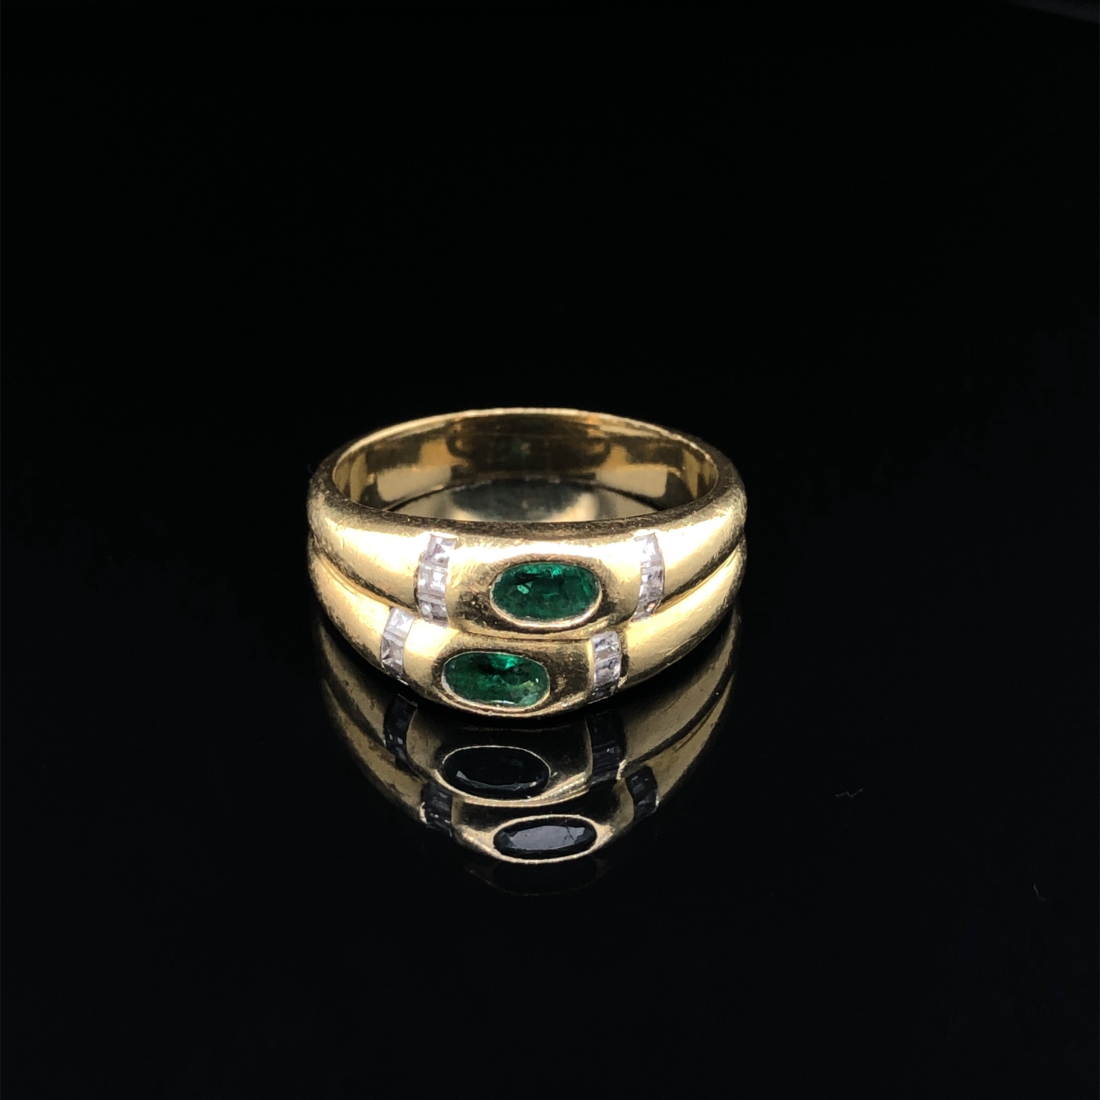 AN EMERALD AND DIAMOND RING. THE TWO OVAL CUT EMERALDS FLANKED WITH A CHANNEL SET OF PRINCESS CUT - Image 2 of 3